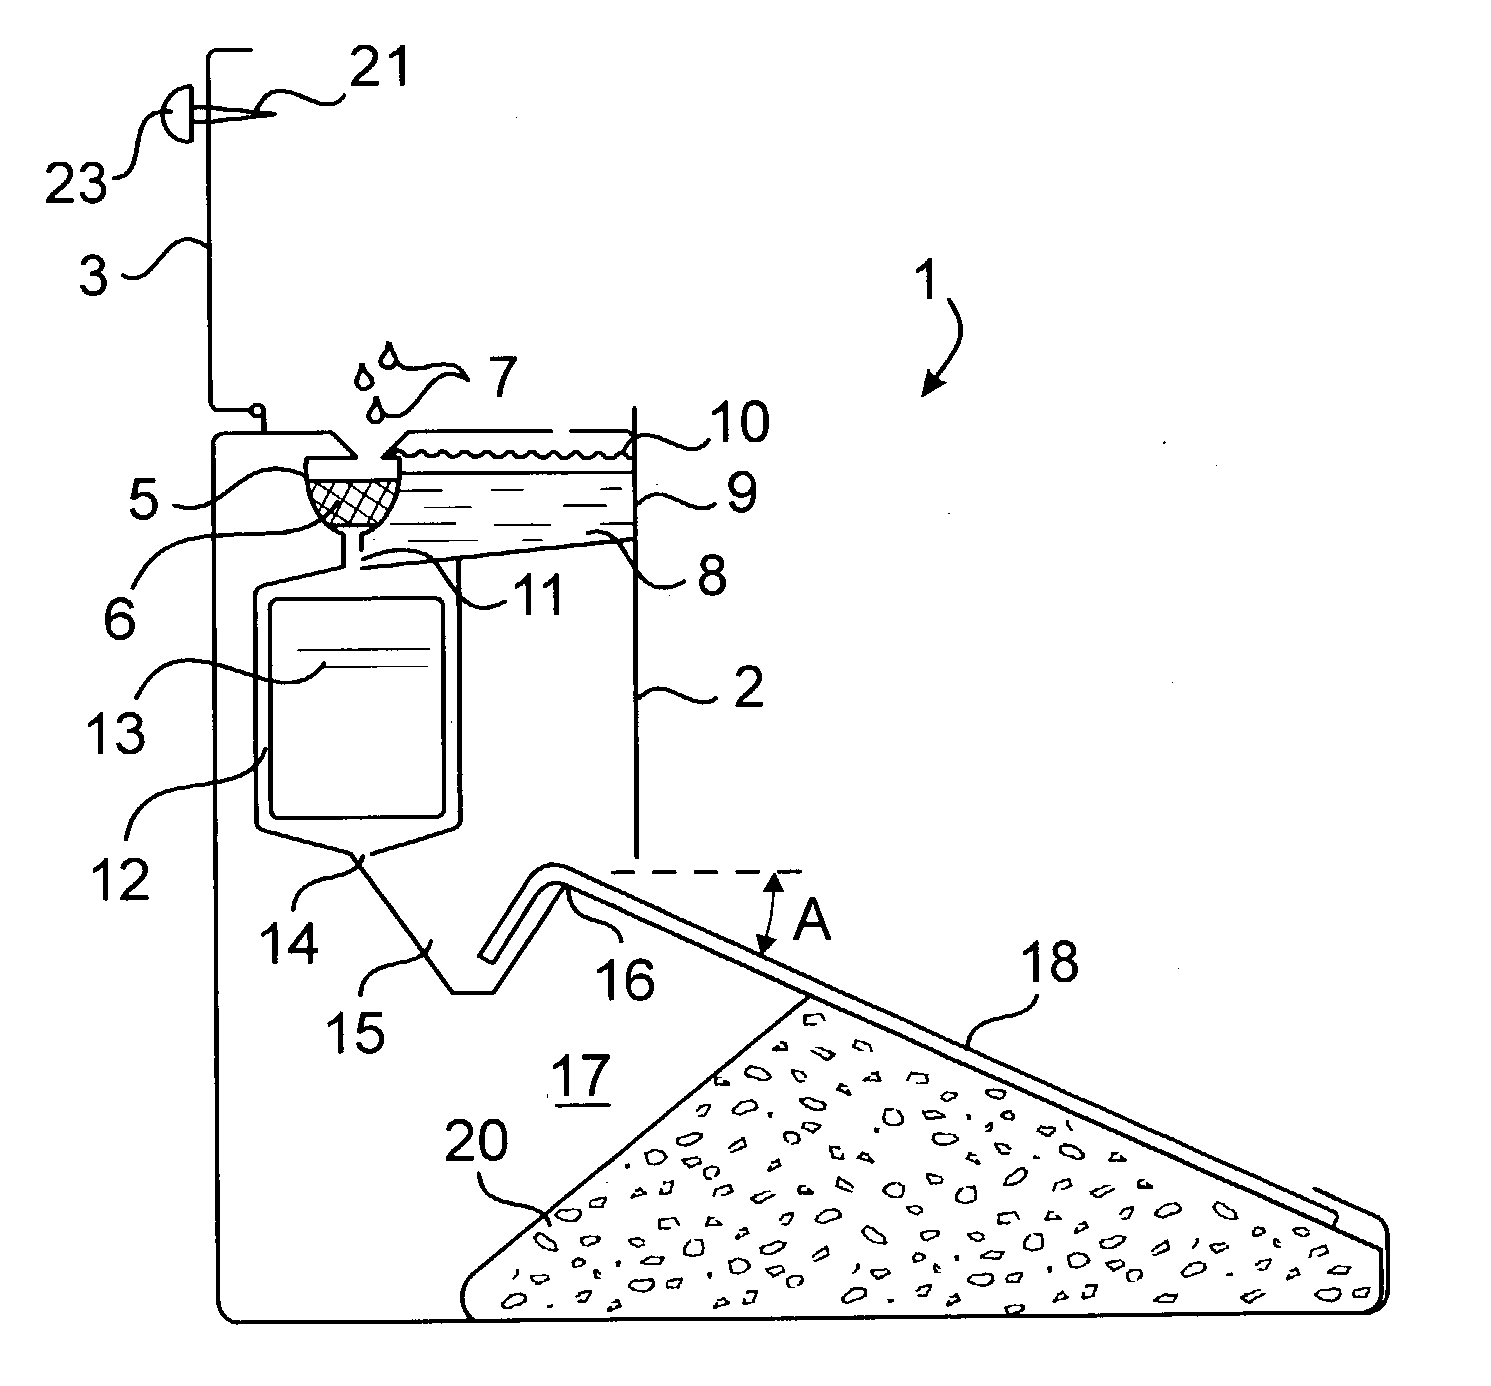 Interrupted, vertical flow testing device